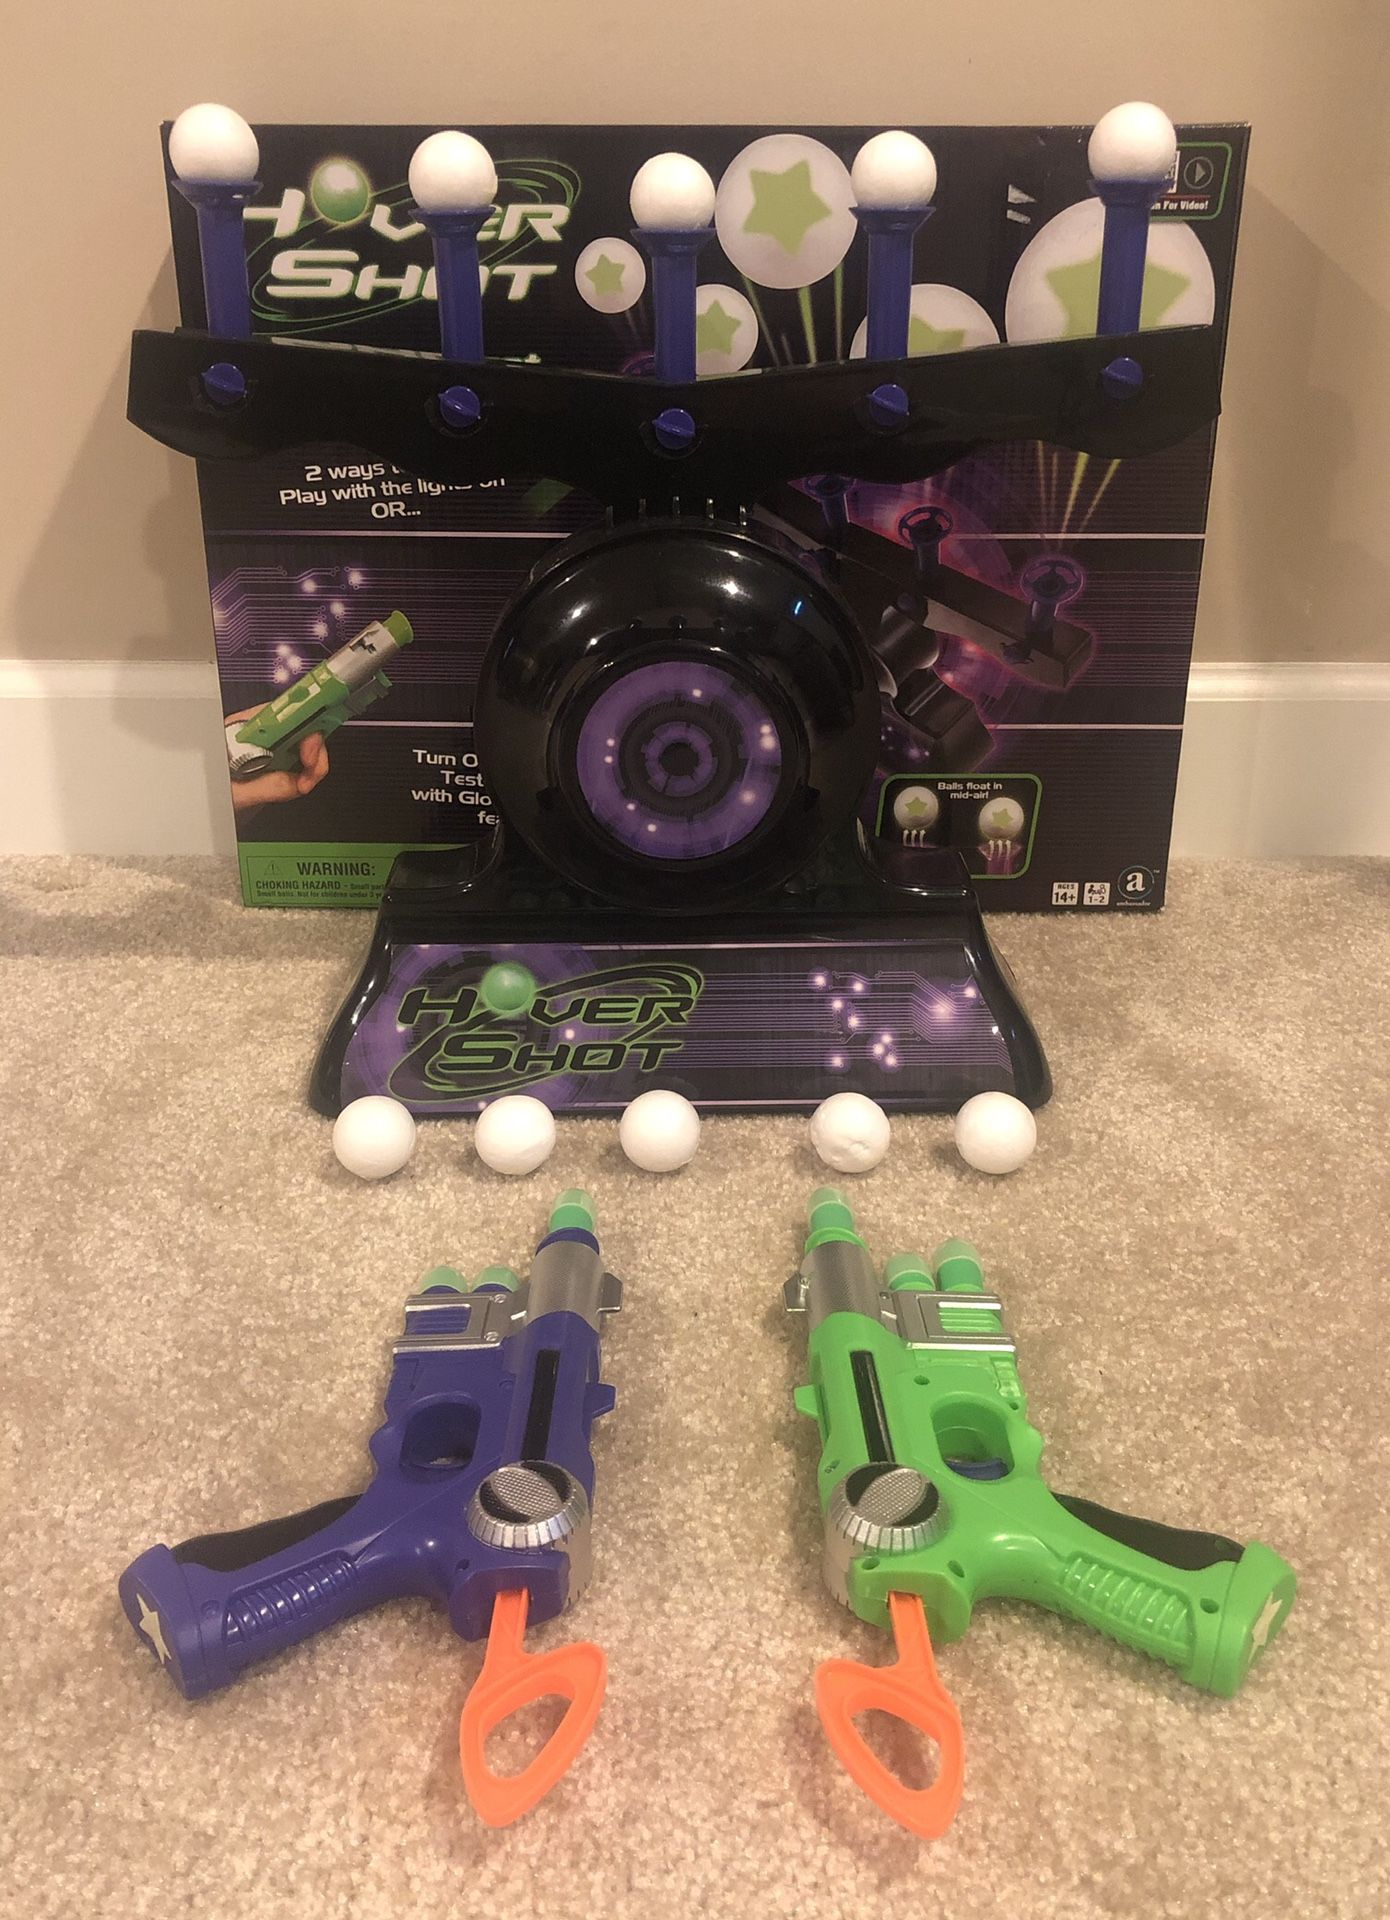 Hover shot kids game toy